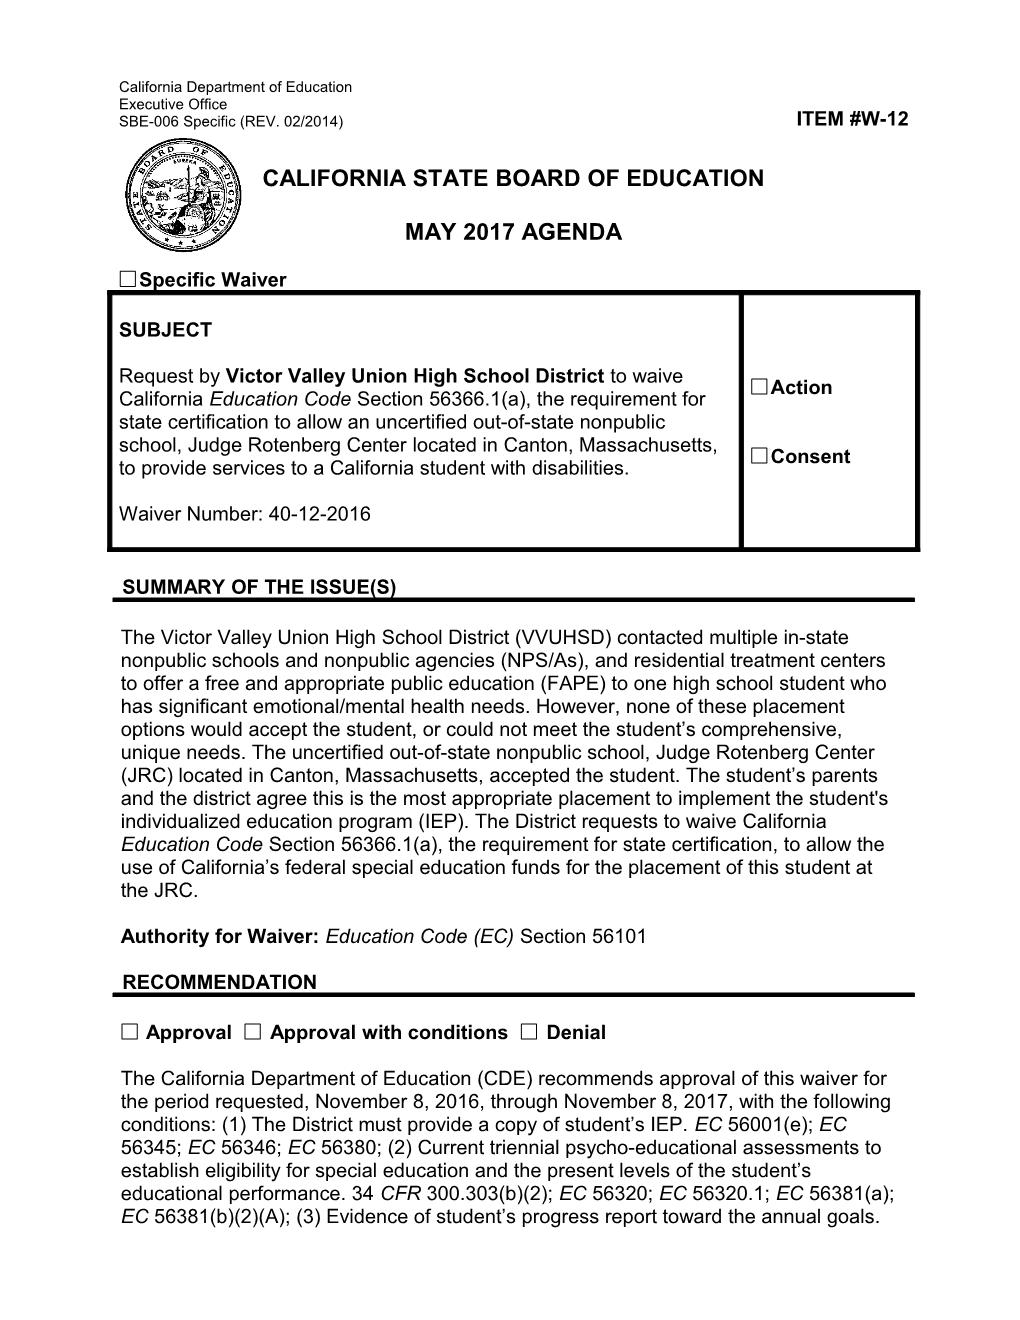 May 2017 Agenda Item W-12 - Meeting Agendas (CA State Board of Education)